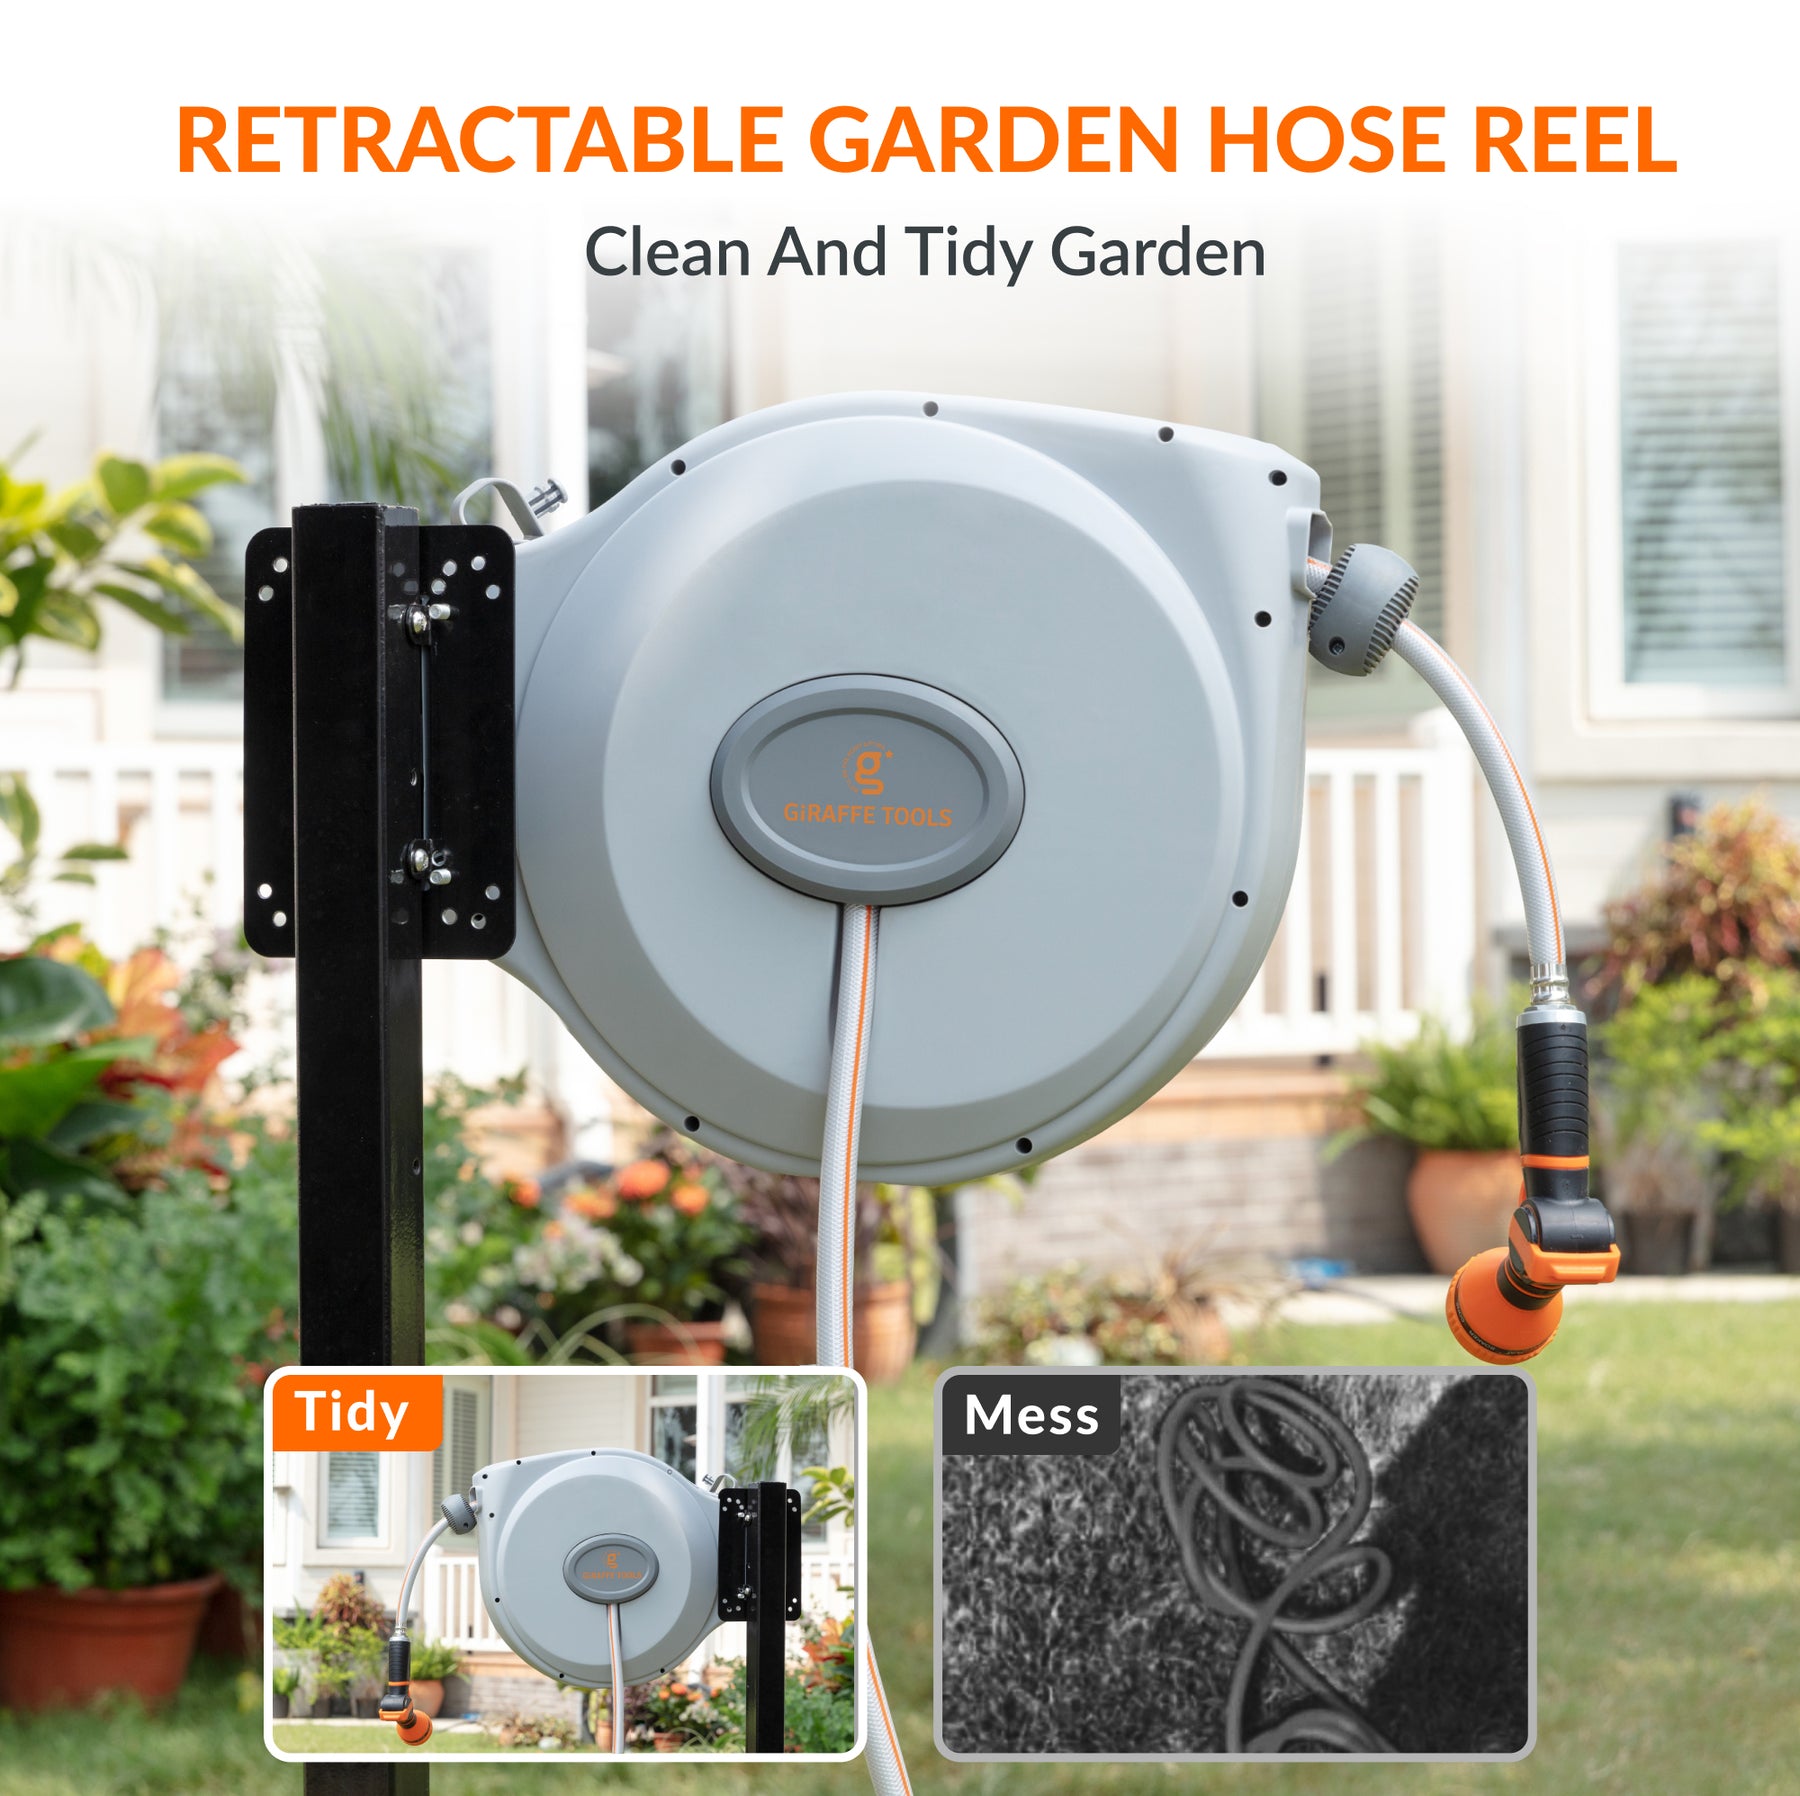 Heavy Duty Retractable Garden Hose Reel with 100FT Hose, 8 Pattern Nozzle,  and Wall Mount Bracket